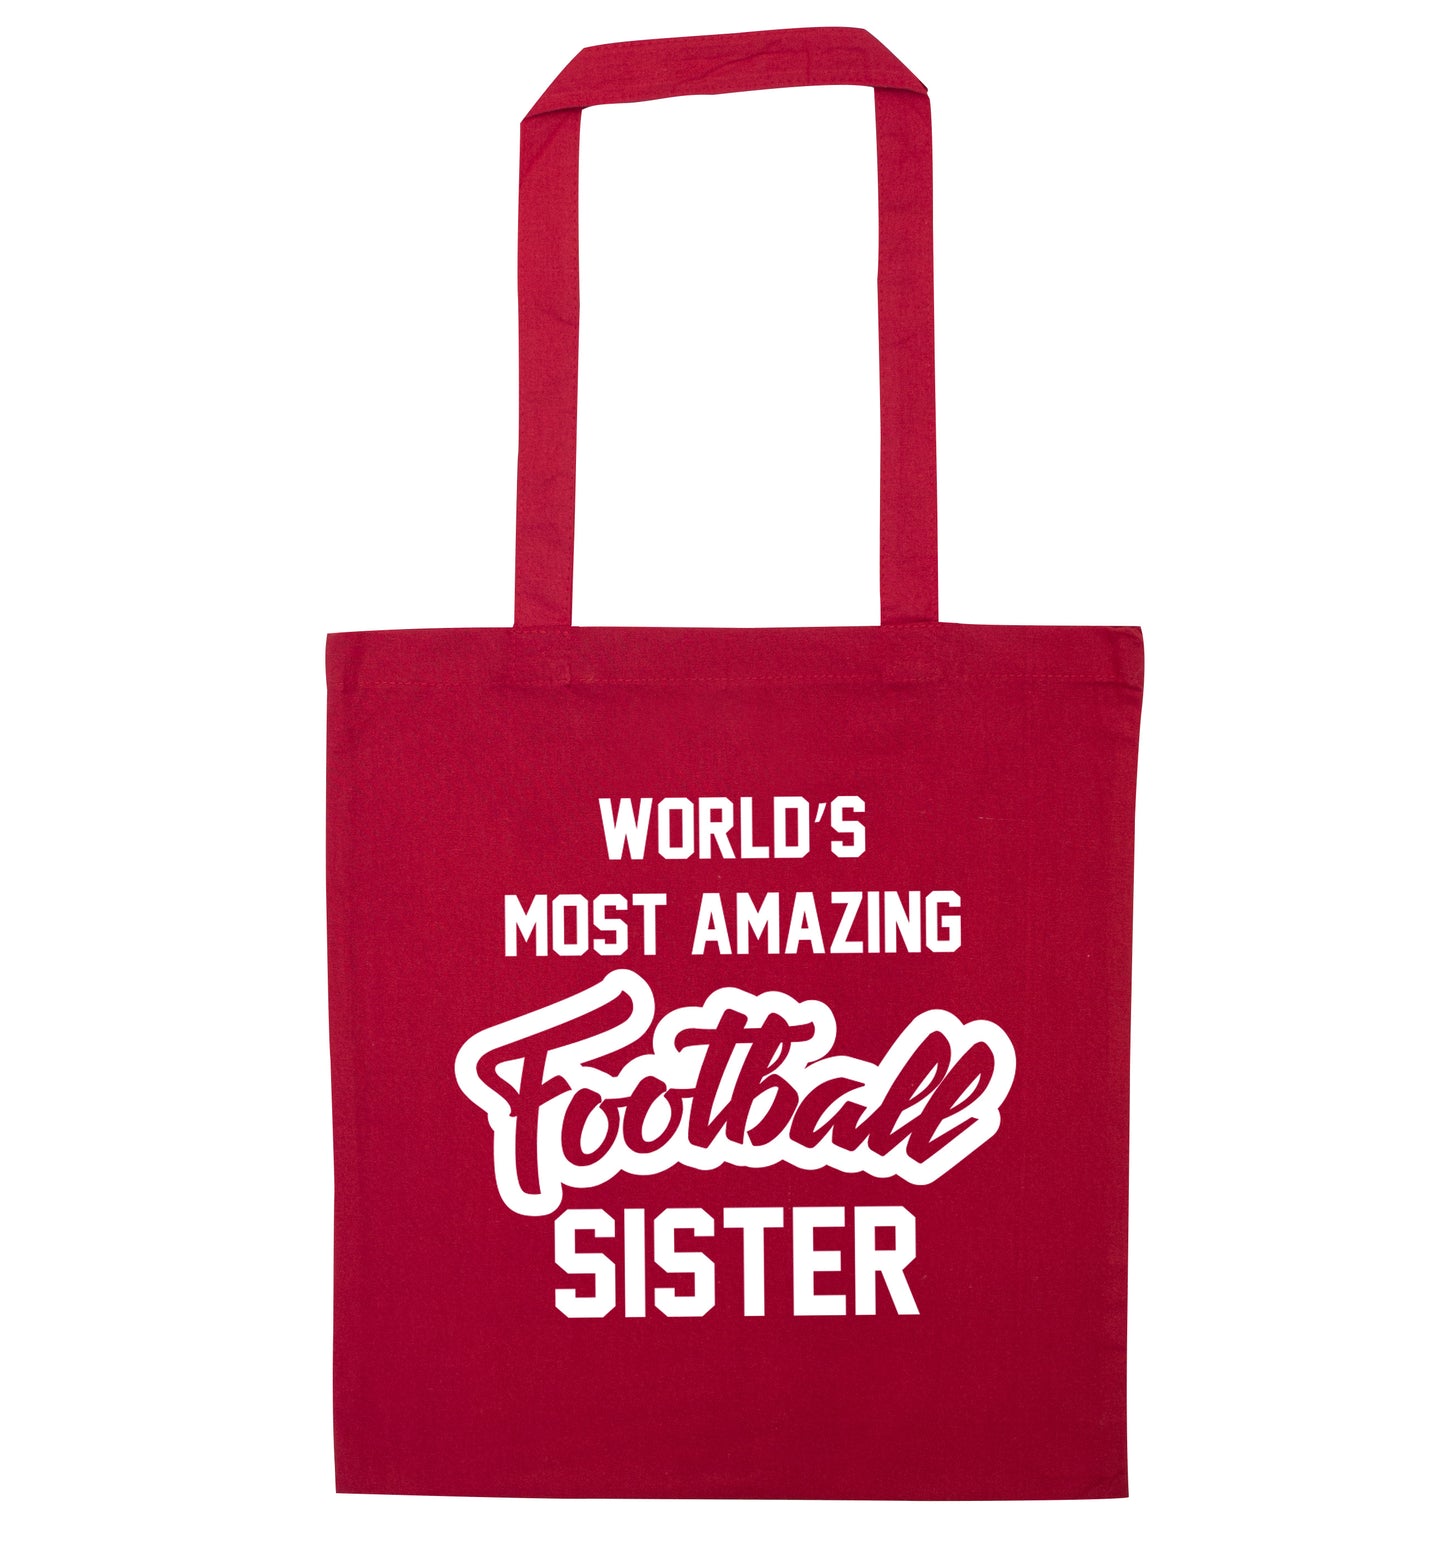 Worlds most amazing football sister red tote bag